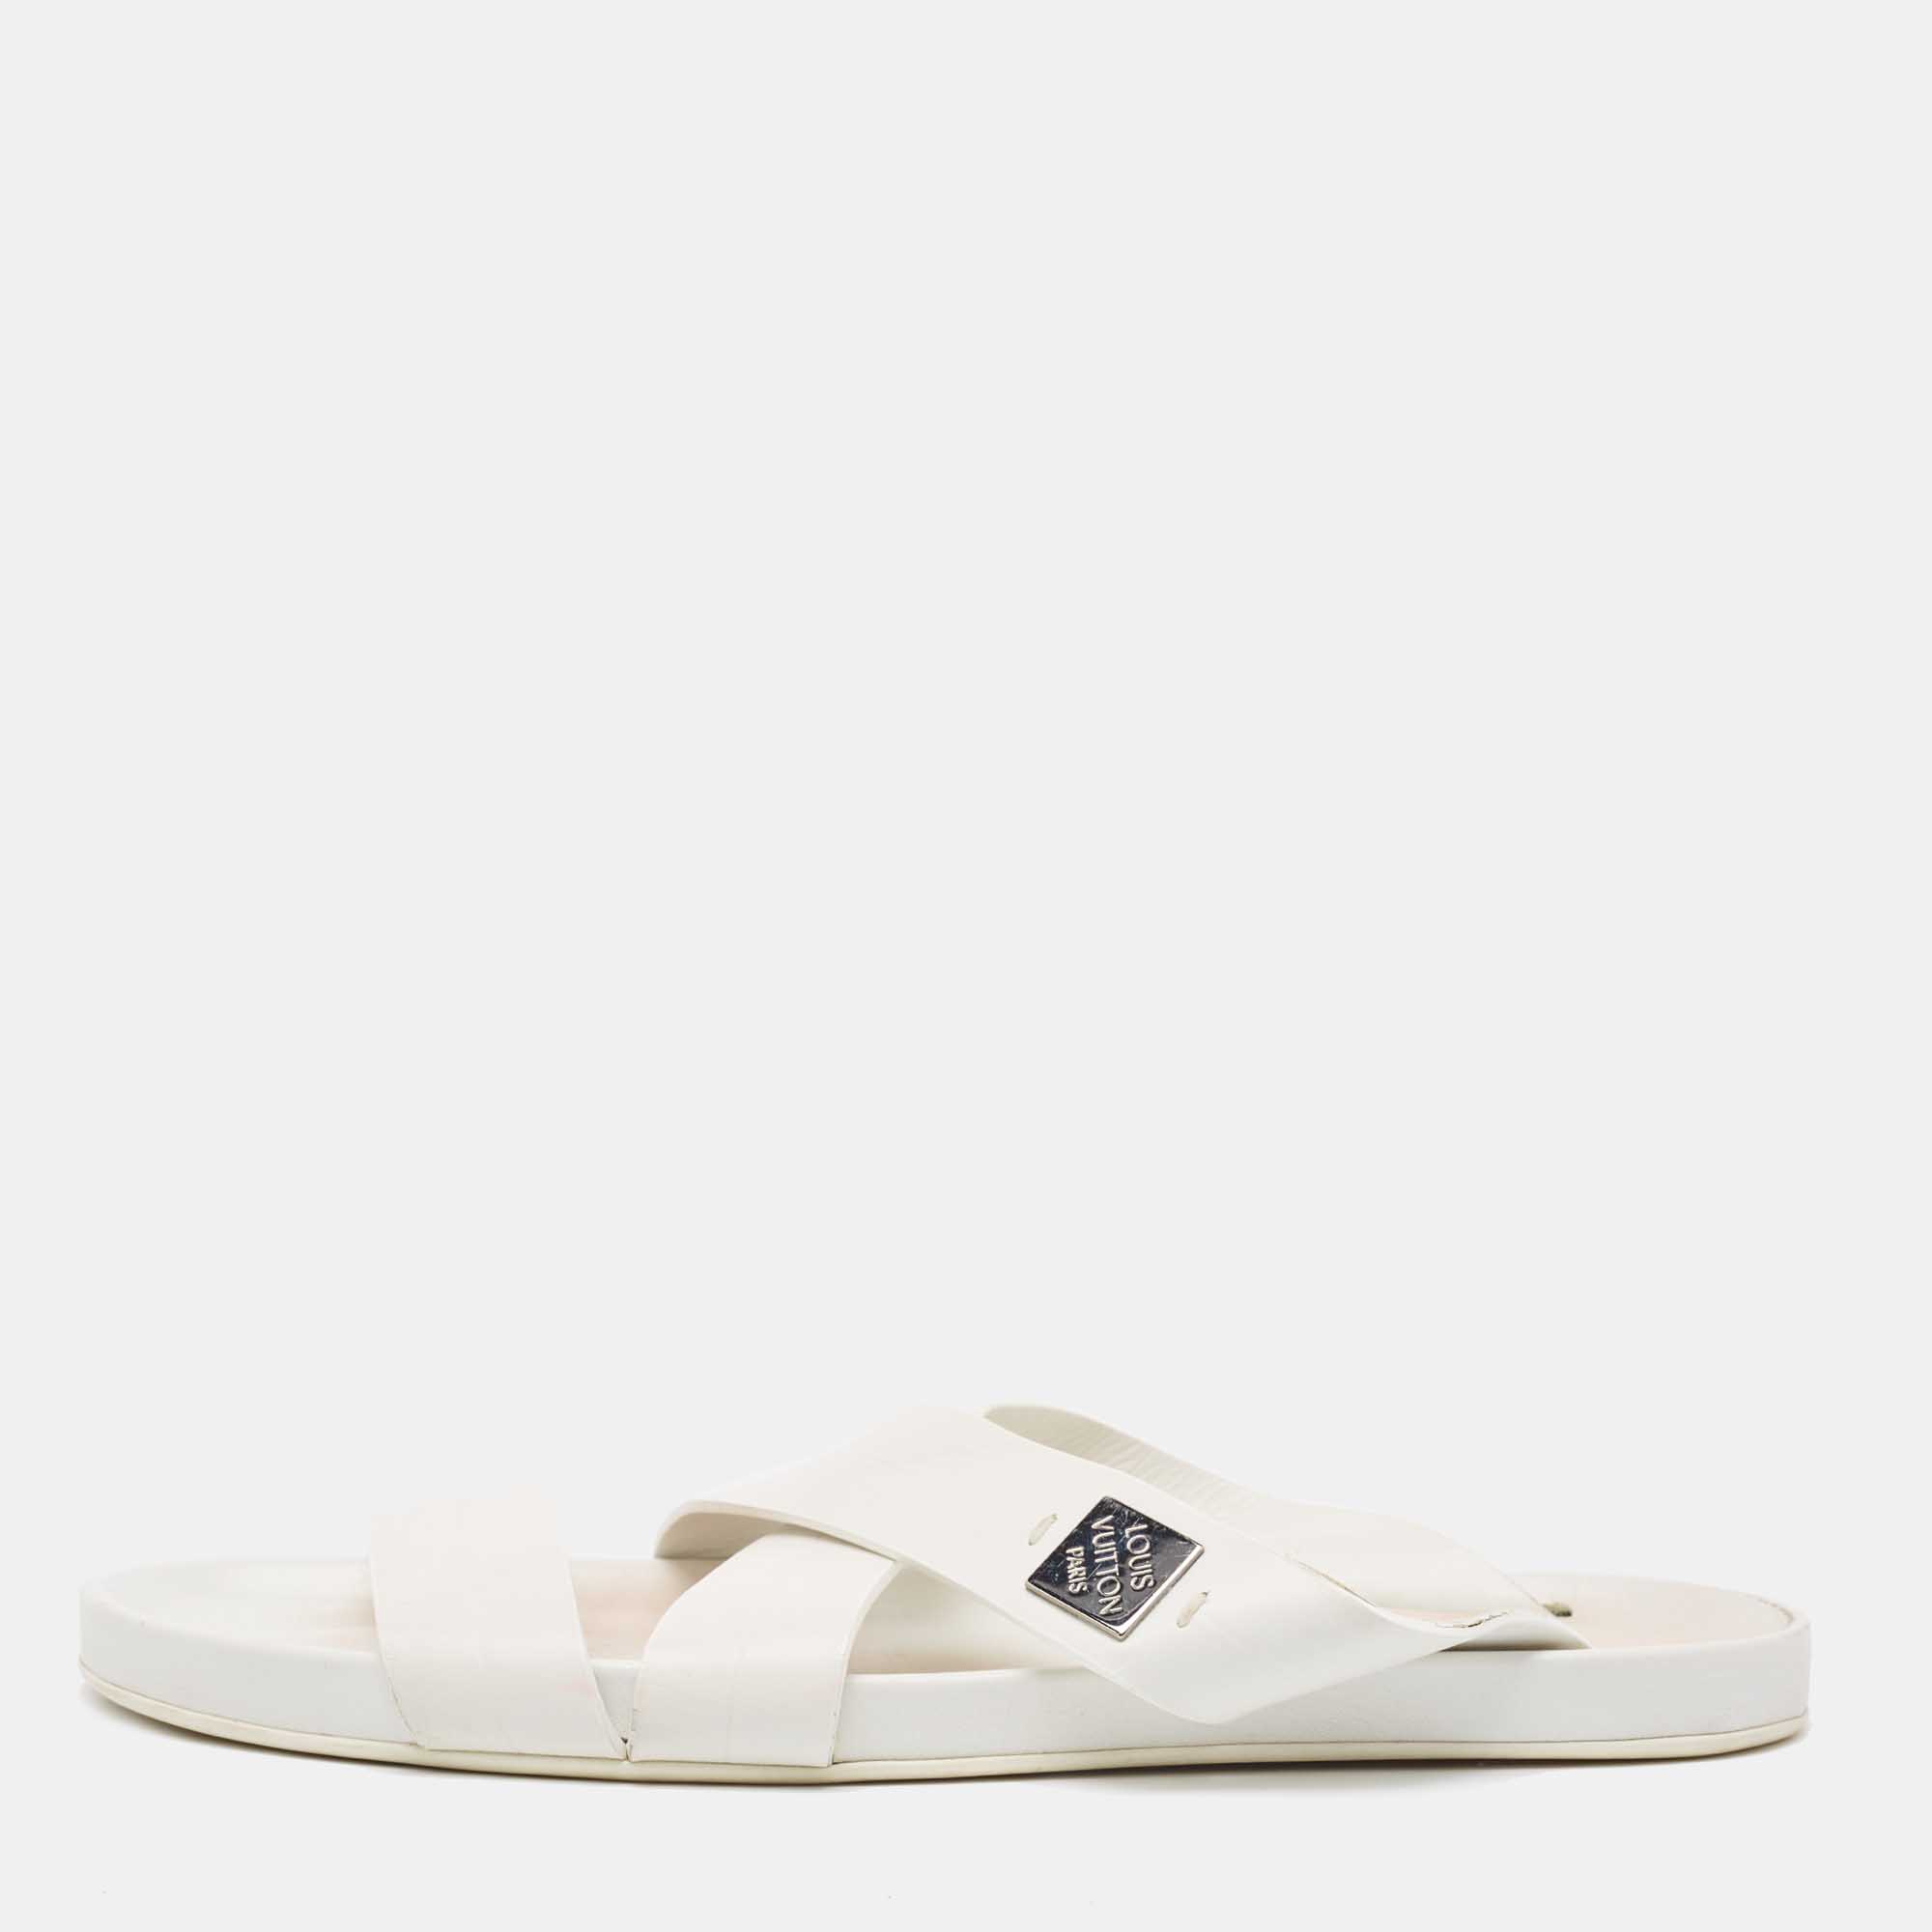 Pre-owned Louis Vuitton White Leather Criss Cross Slides Size 42